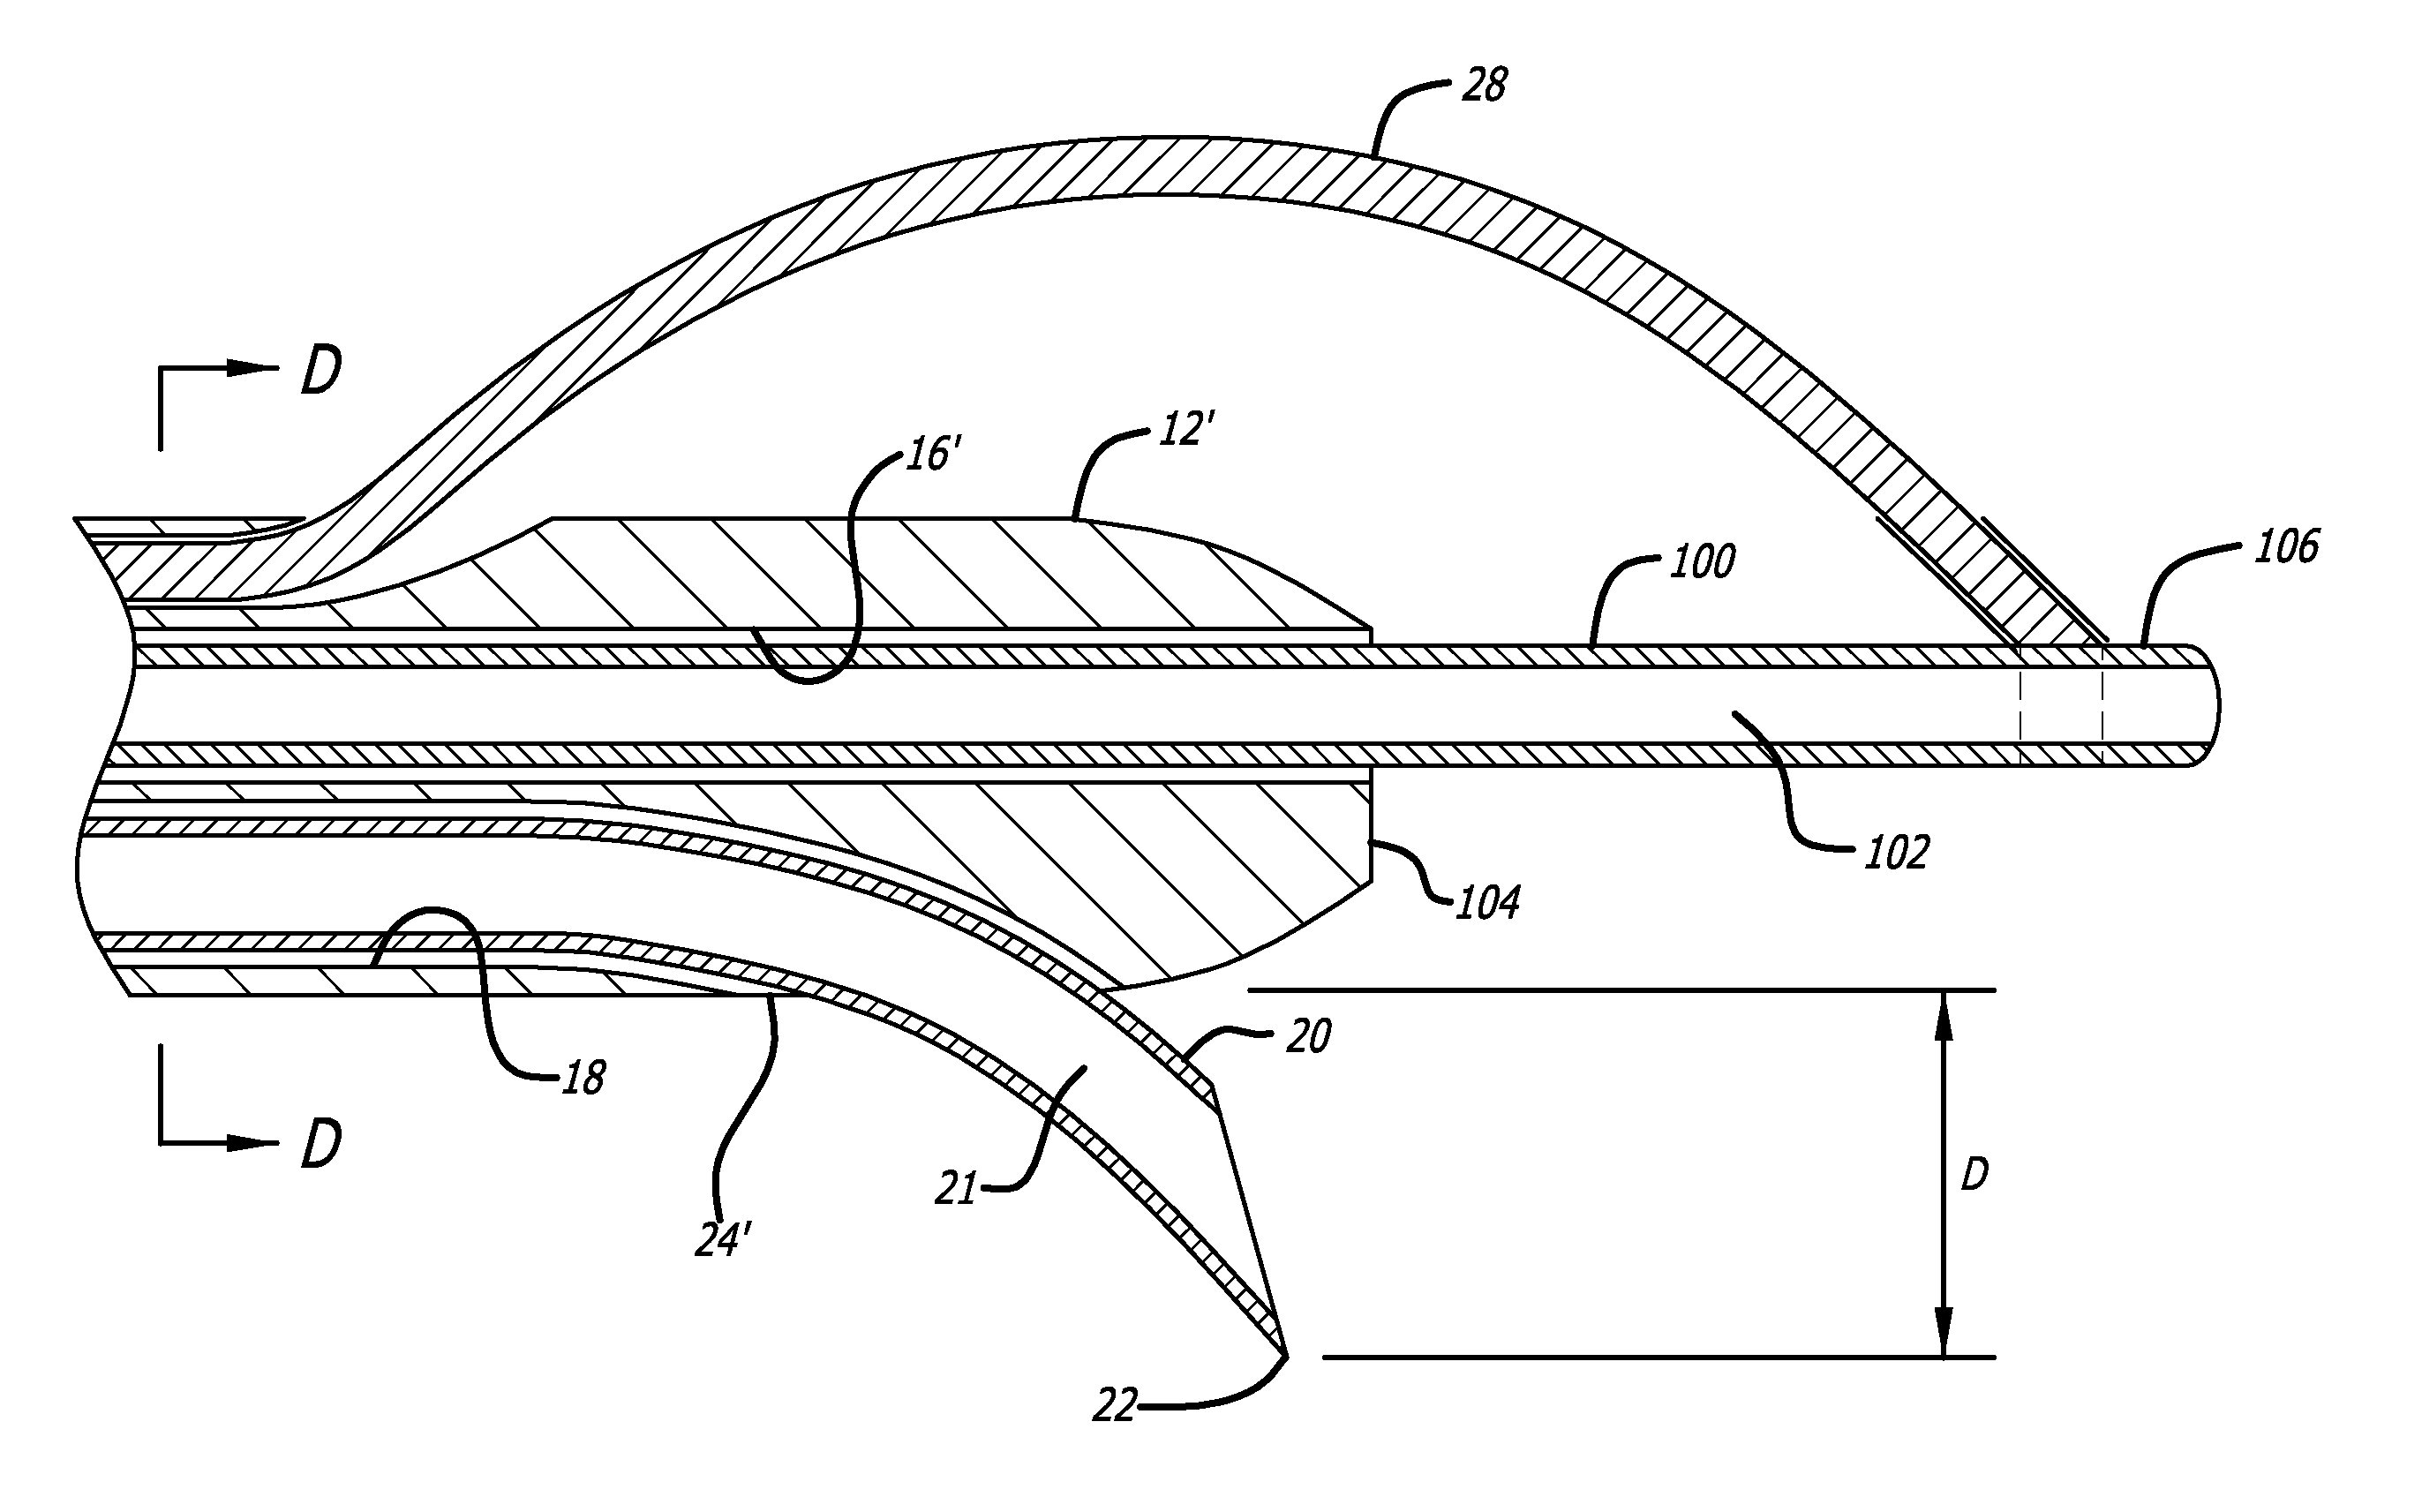 Needle catheter for delivery of agents directly into vessel wall